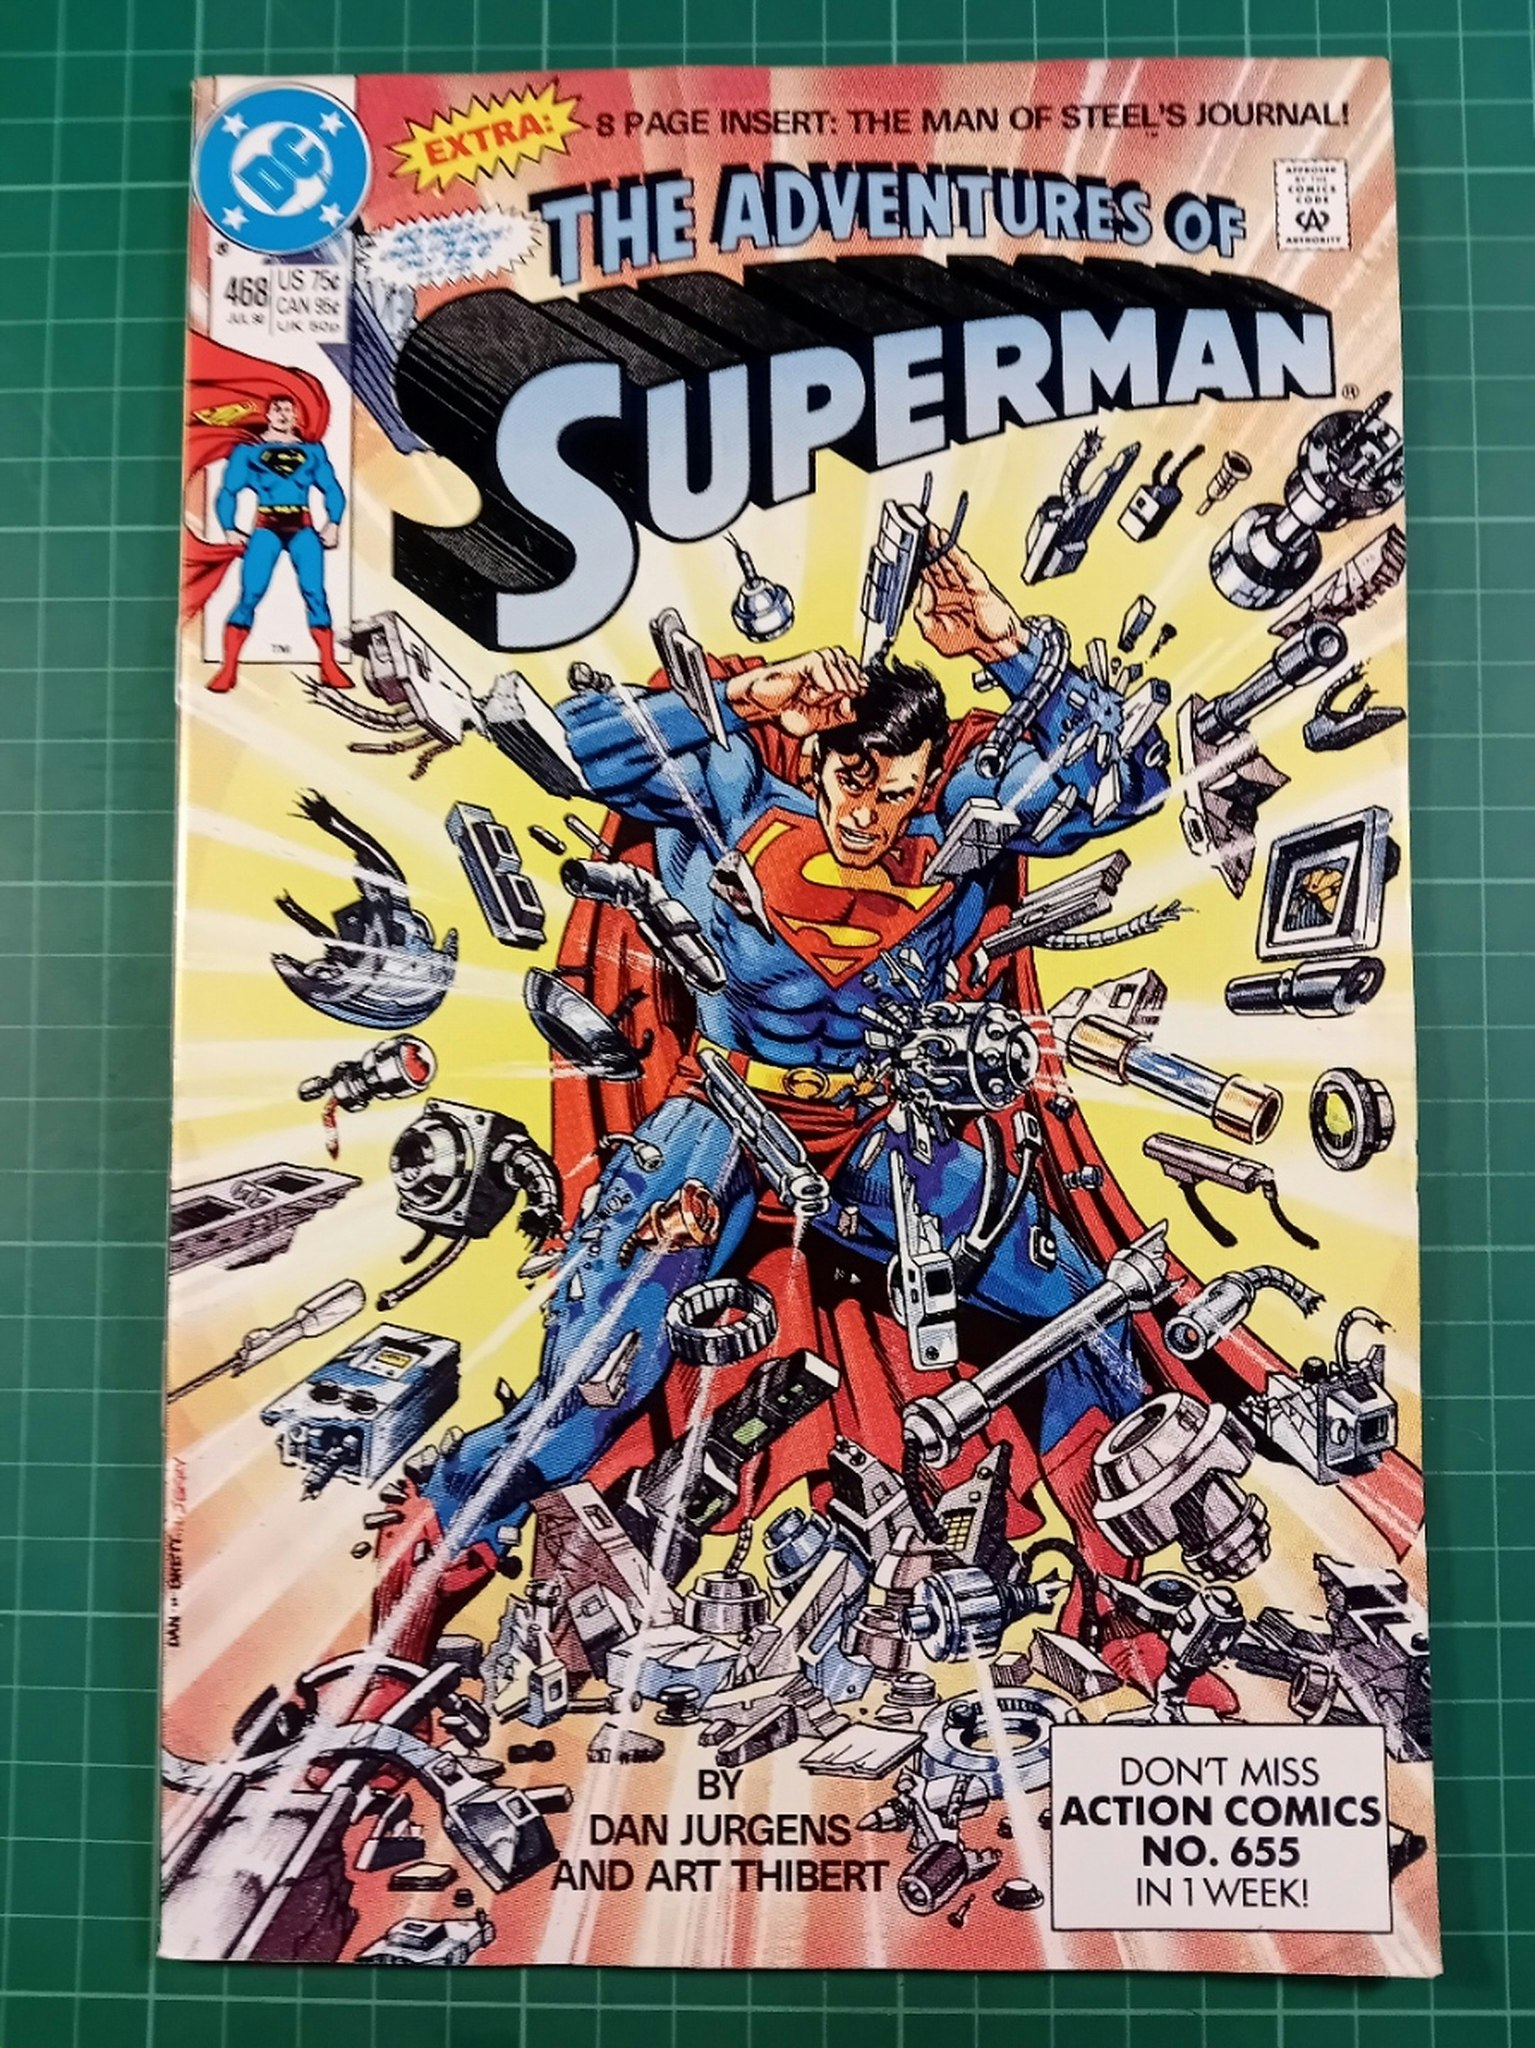 The adventures of Superman #468